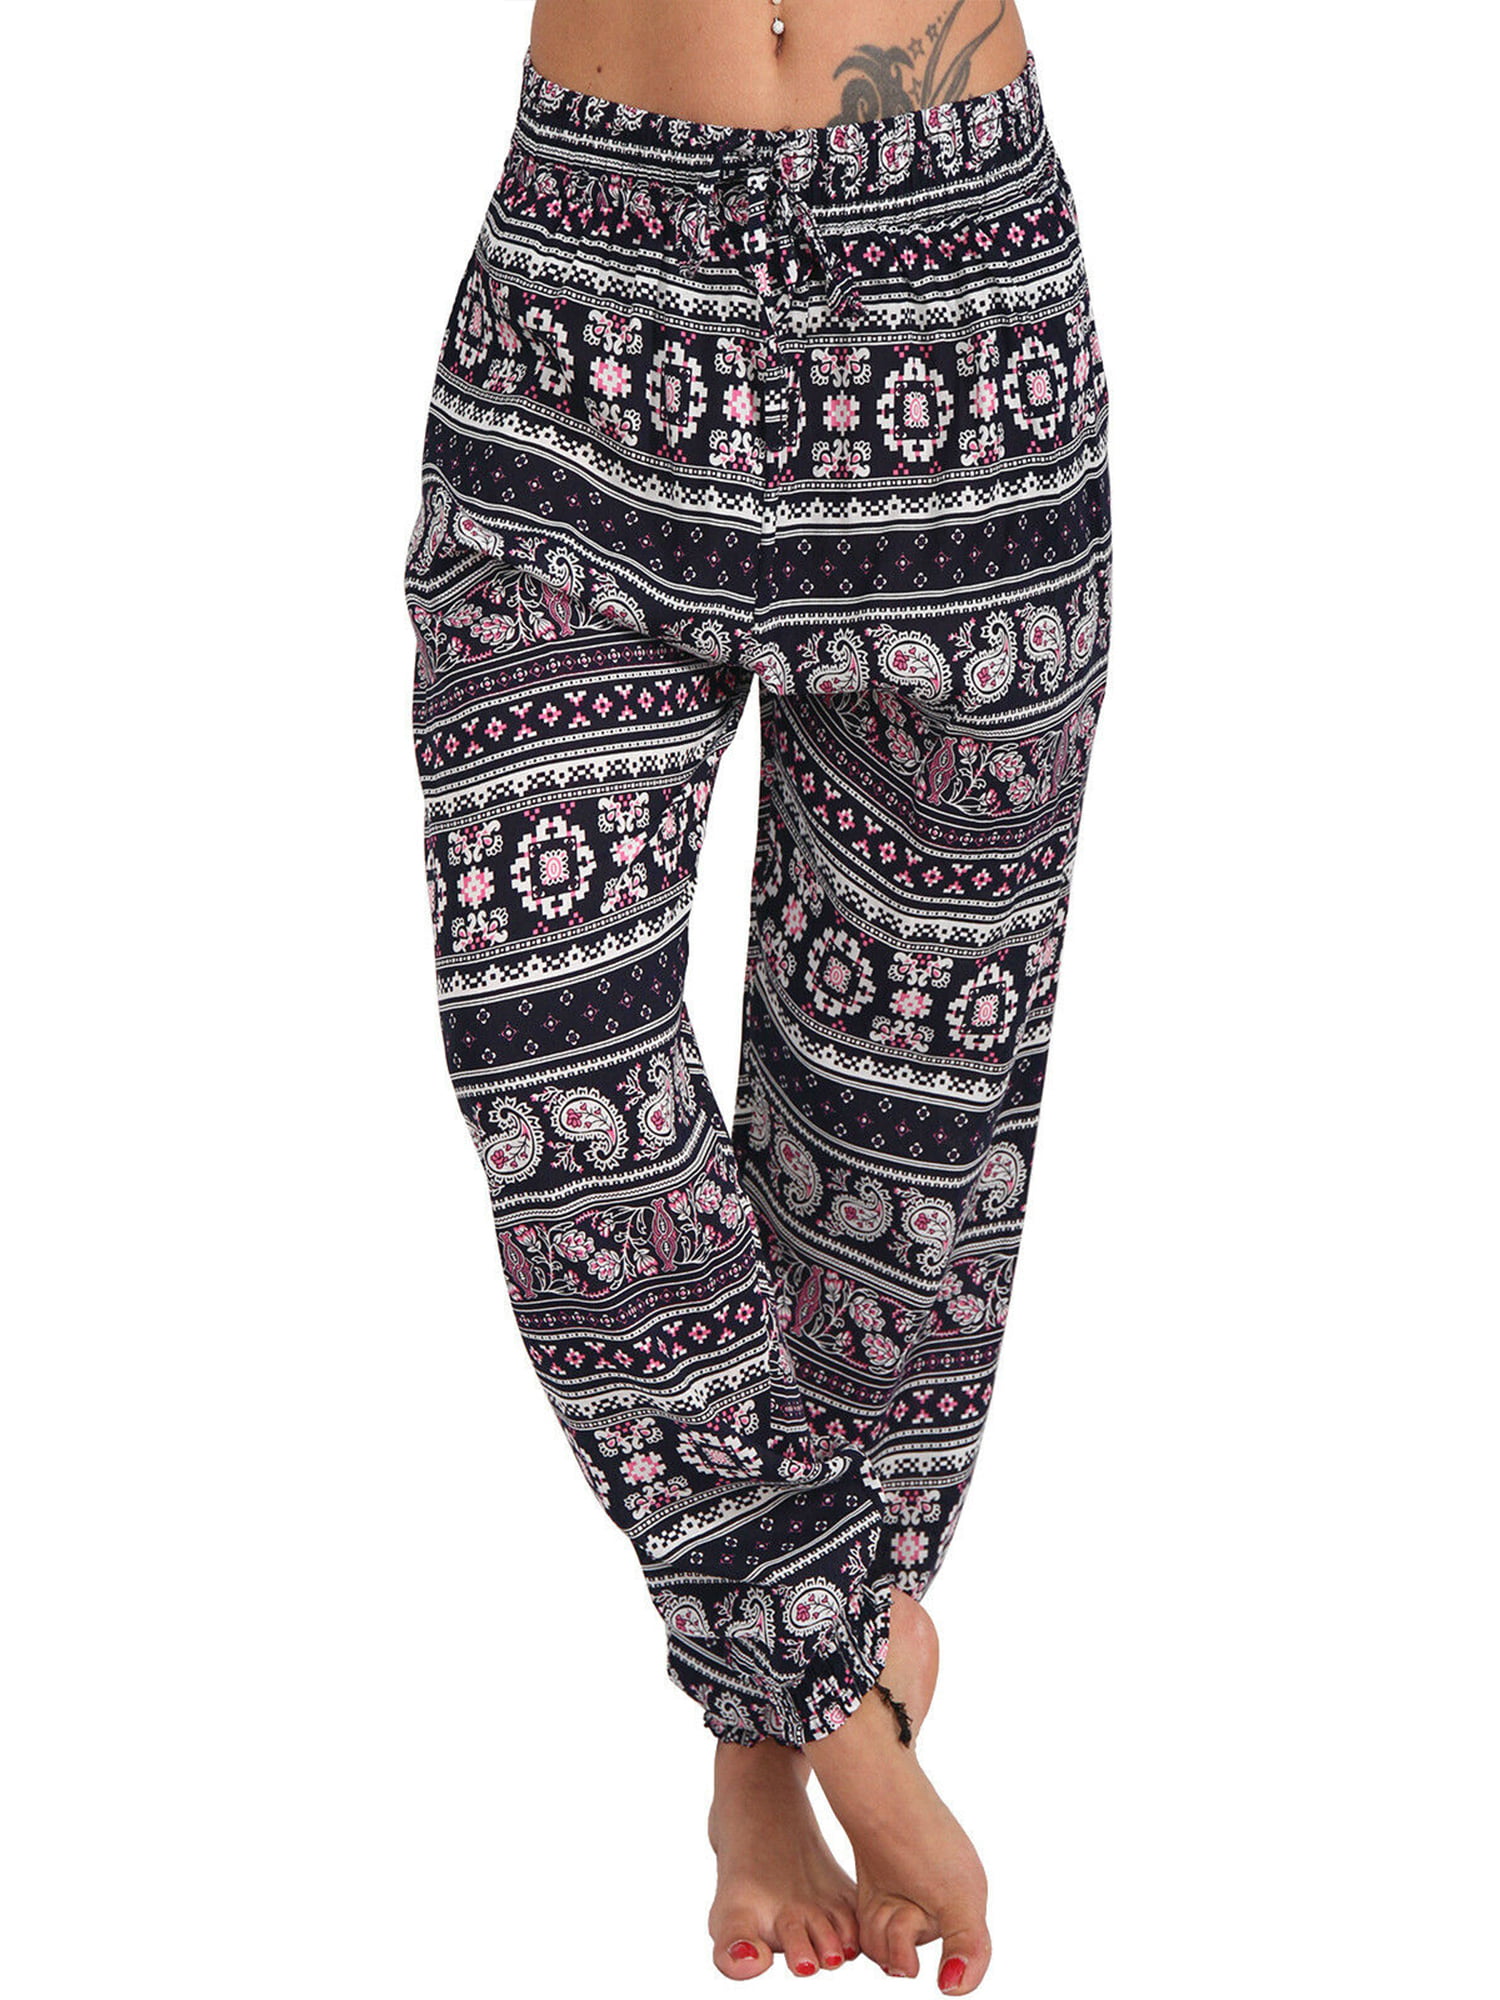 Floral Harem Joggers with fold-over waistband.